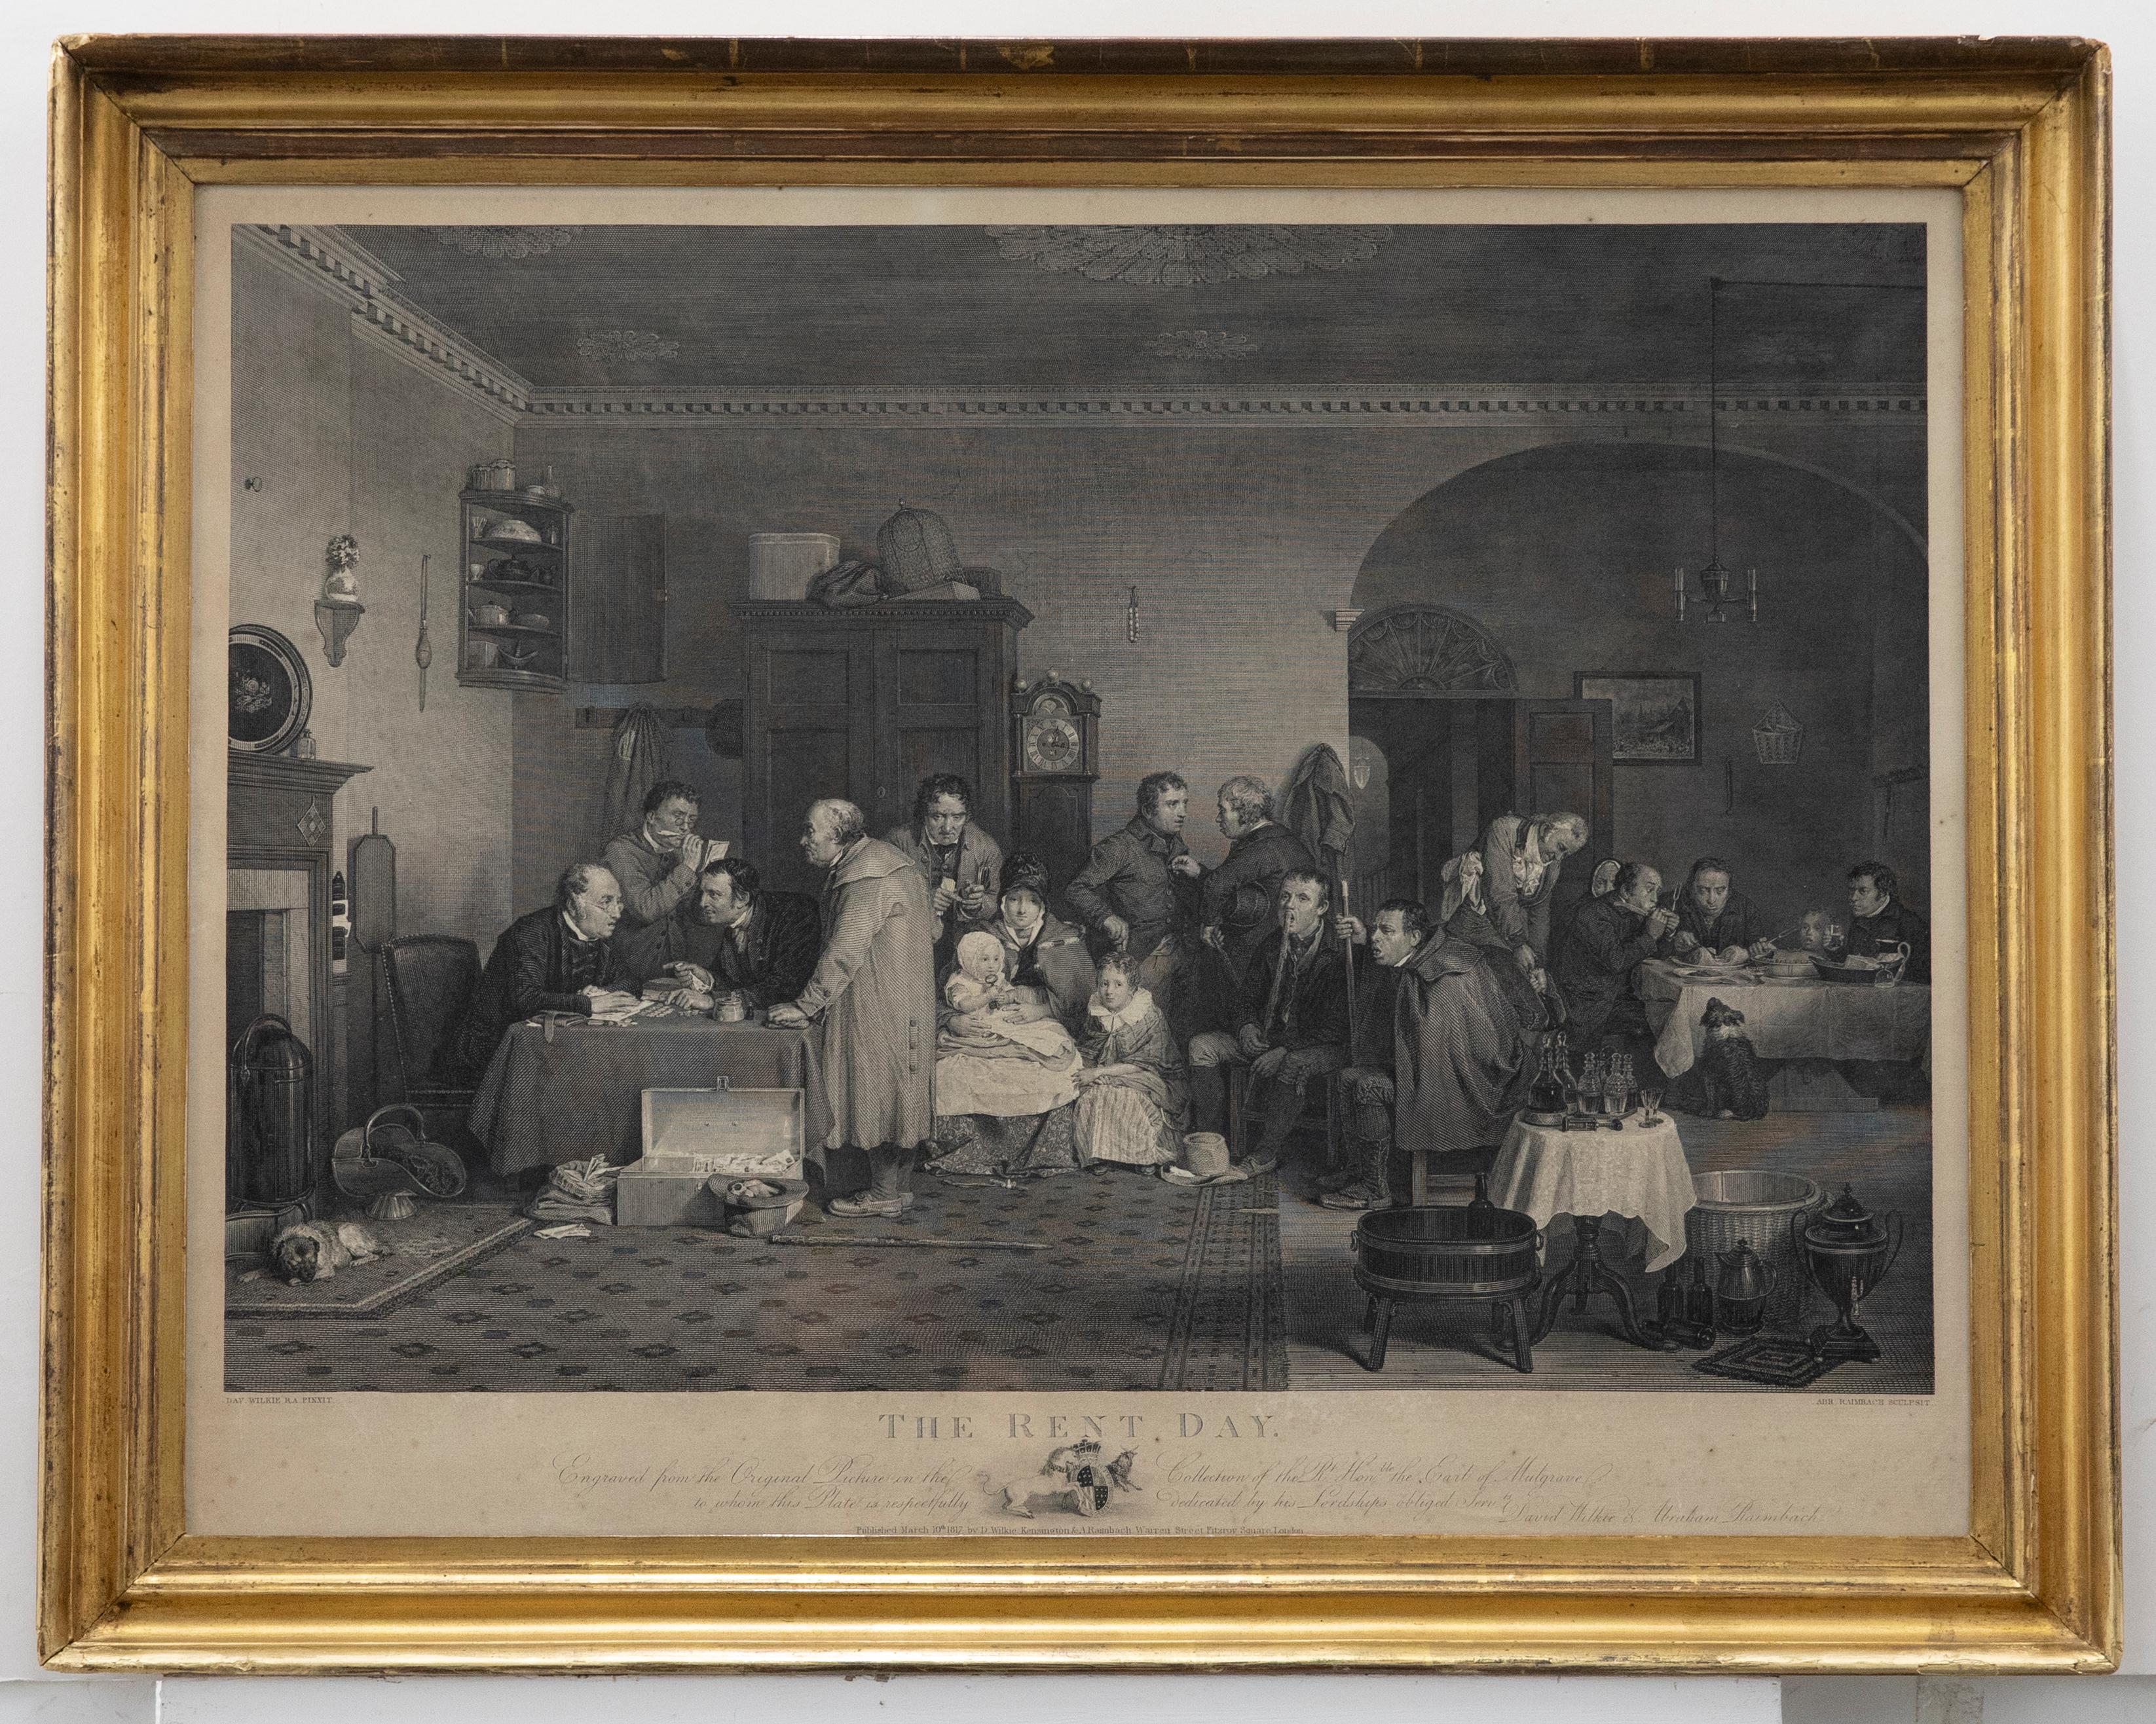 Unknown Figurative Print - Abraham Raimbach After David Wilkie RA - Framed 1817 Engraving, The Rent Day